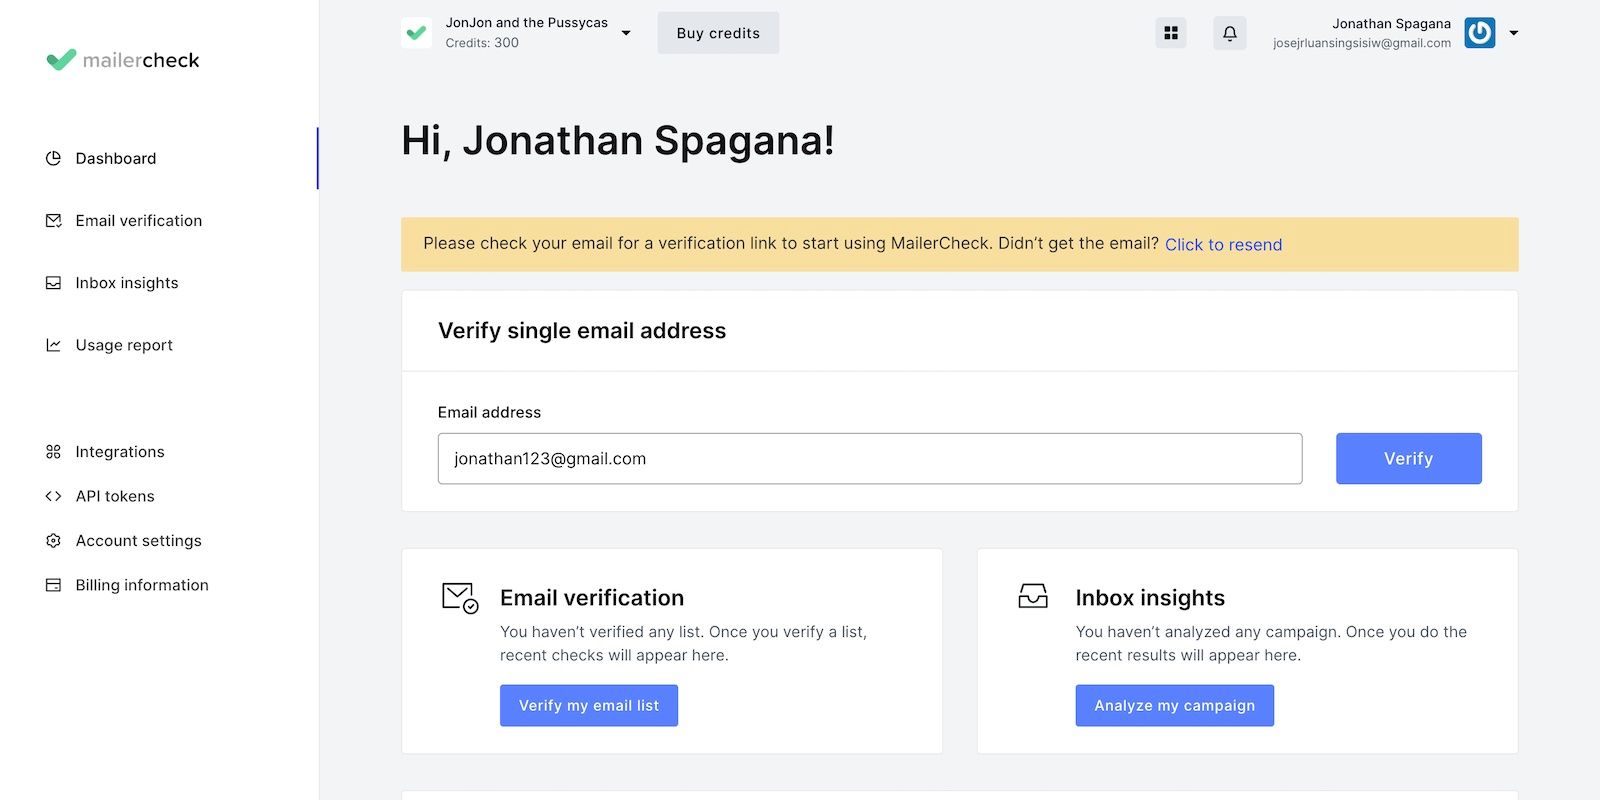 The Homepage and Email Verification of MailerCheck